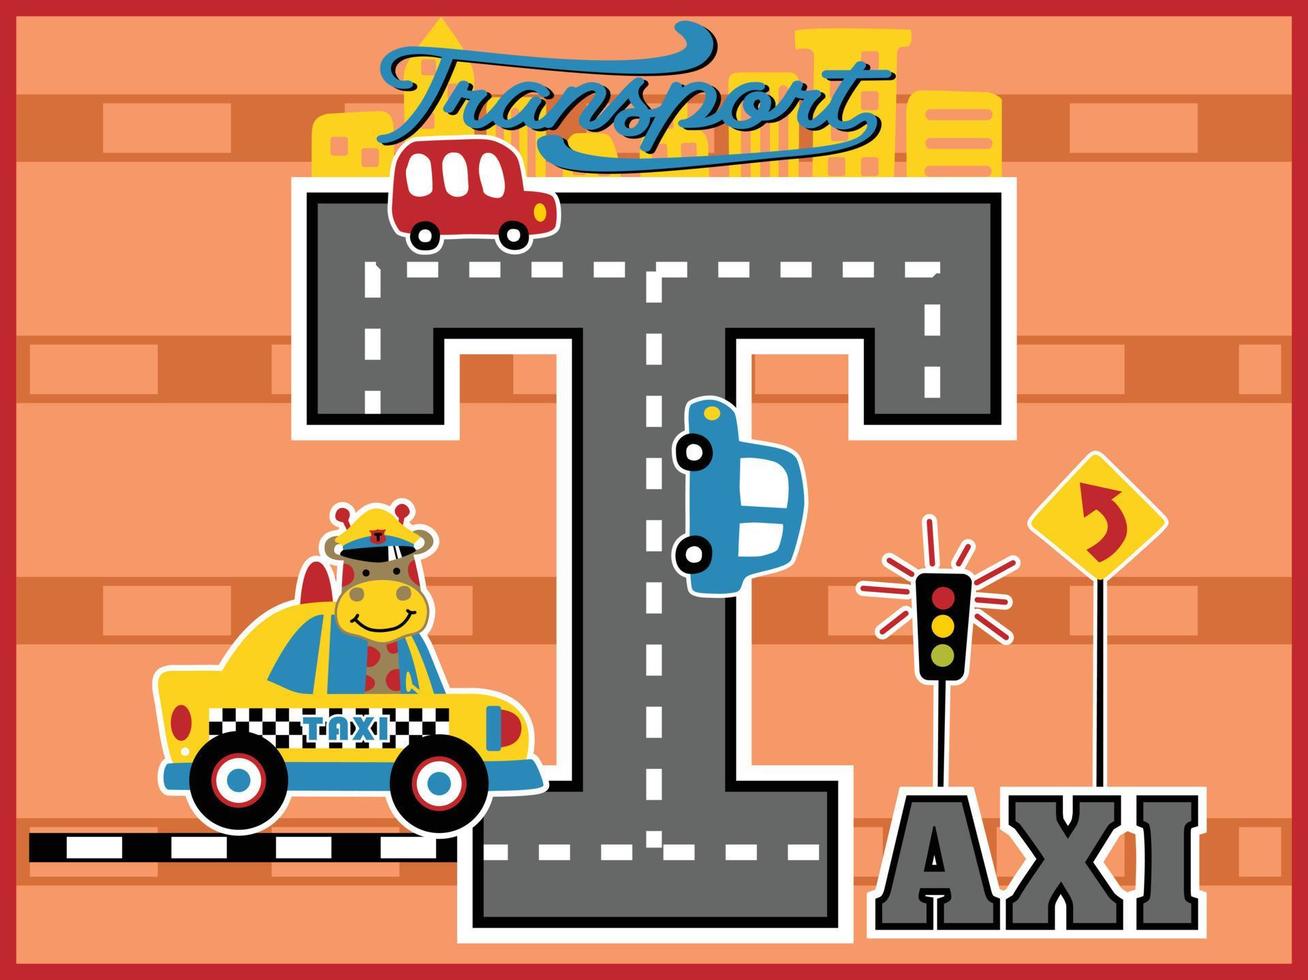 Transportations cartoon vector with cute giraffe on yellow taxi, traffic elements illustration on big TAXI text